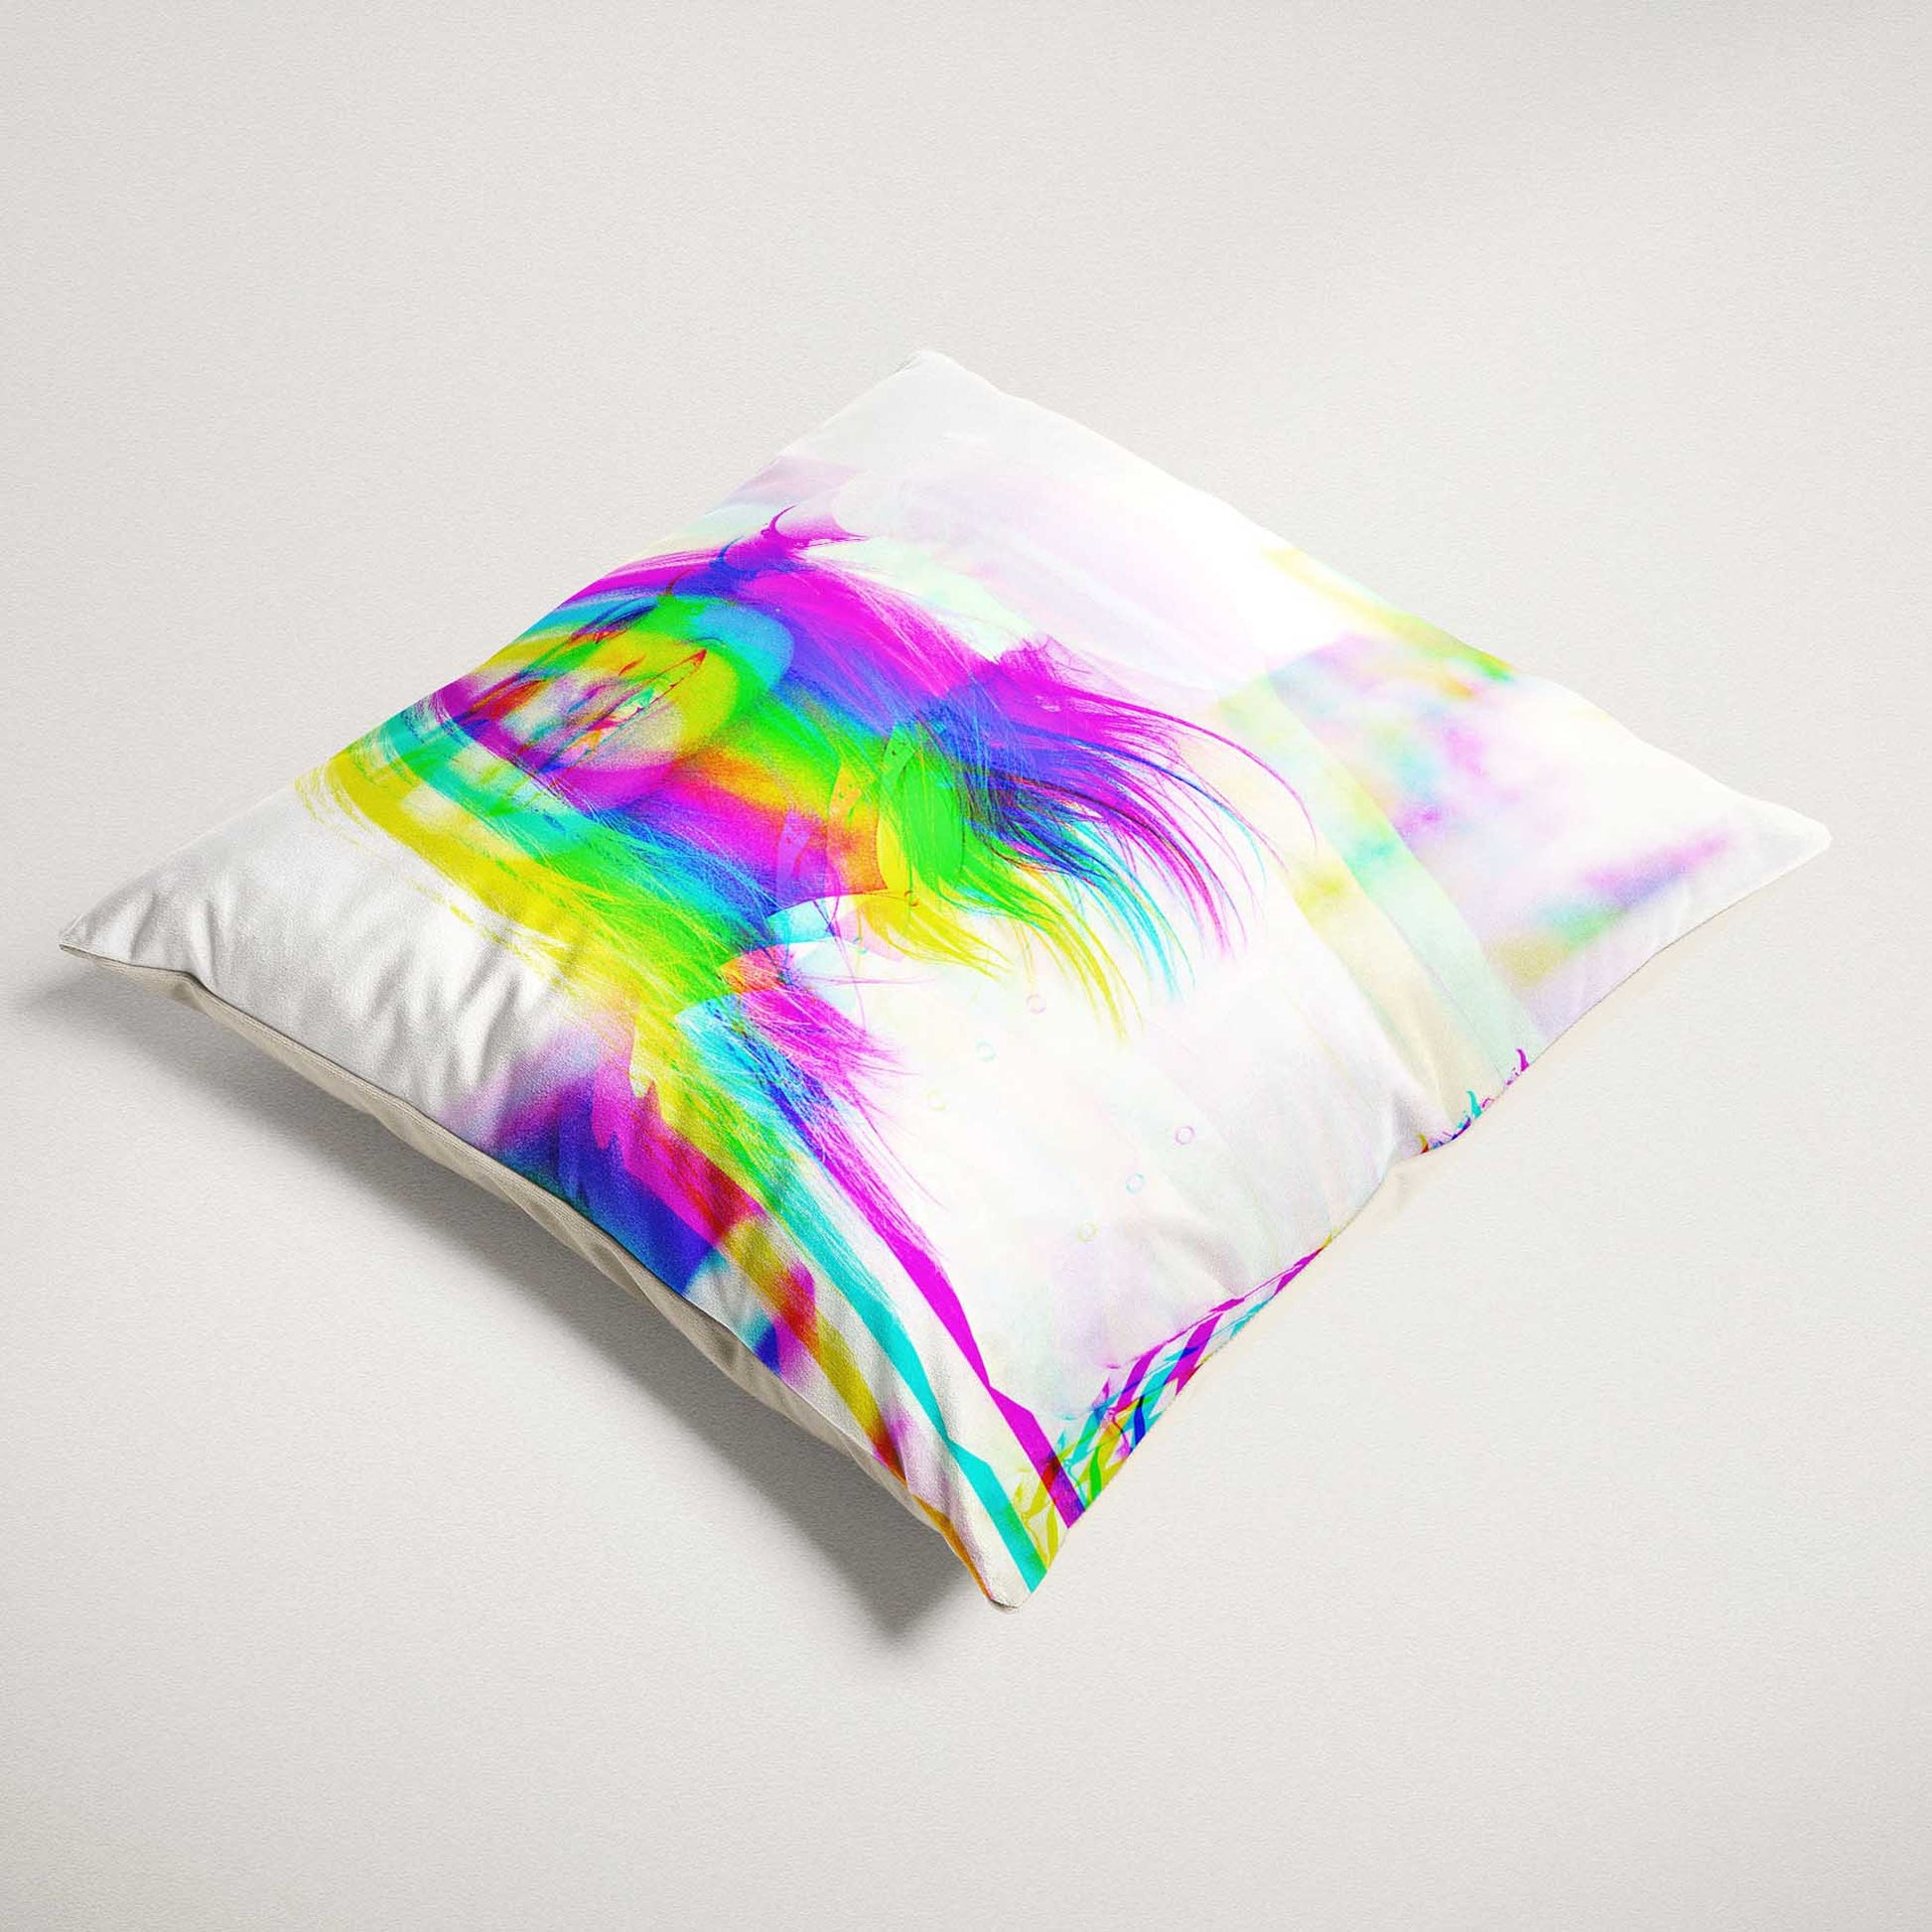 Elevate your space with the Personalised Anaglyph 3D Cushion. Its plush velvet fabric offers a soft and luxurious feel, while the print from your photo adds a personalized touch. The minimalist design exudes elegance